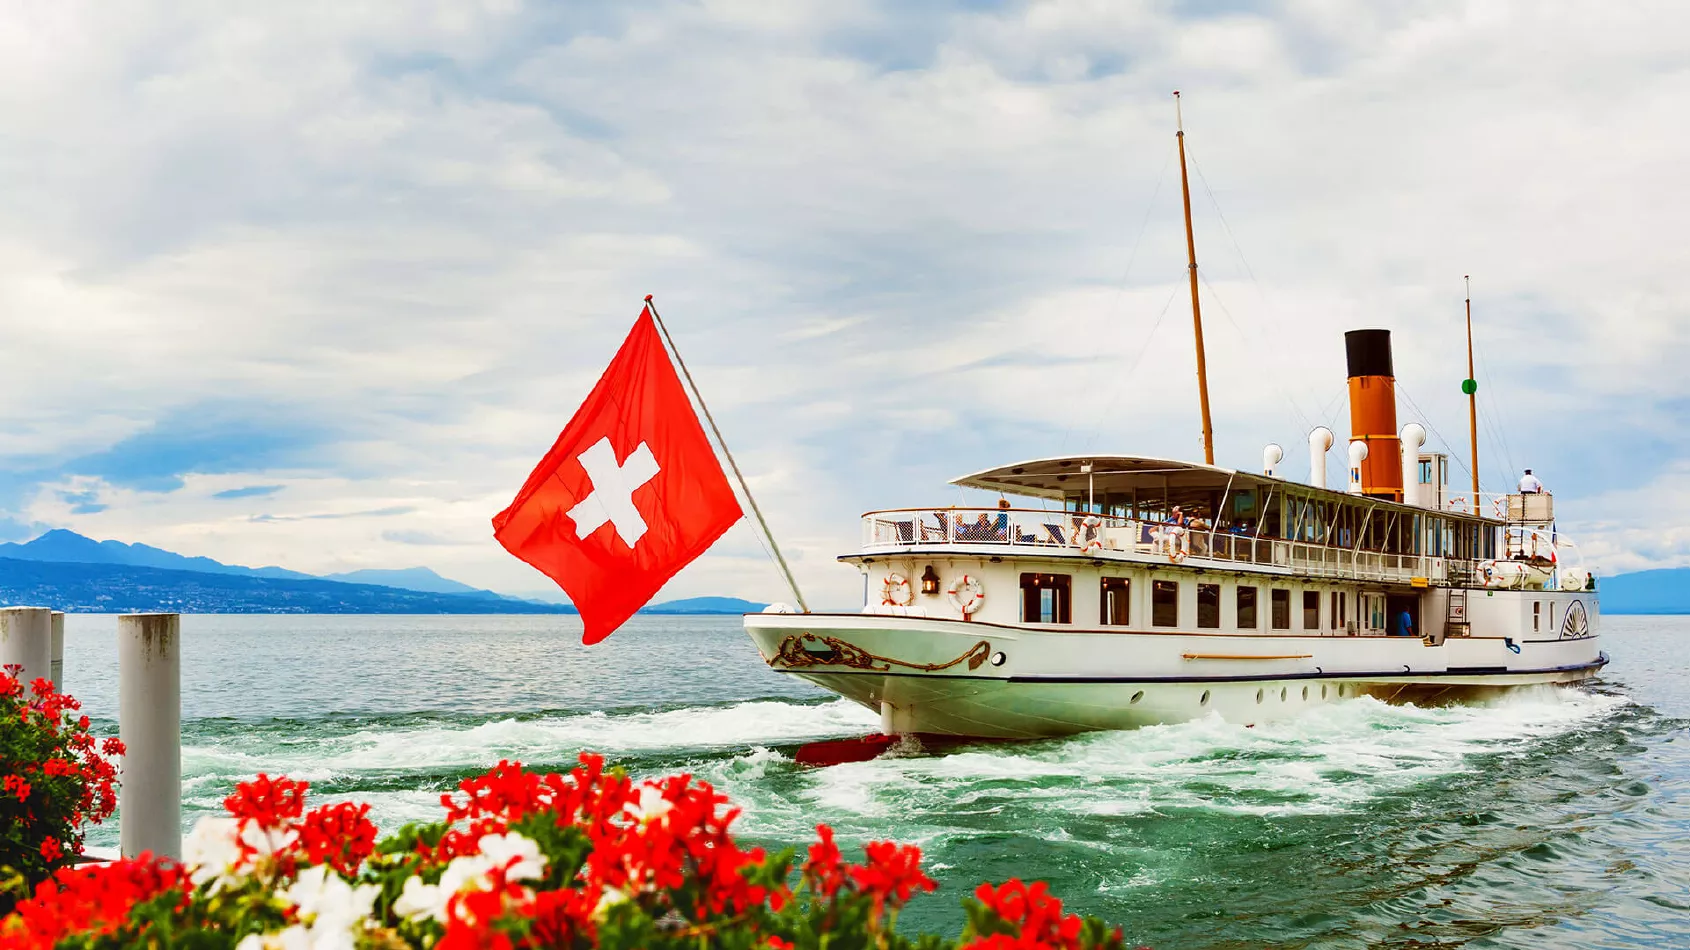 Boat-trip-to-Chillon-Castle-in-Montreux-Switzerland